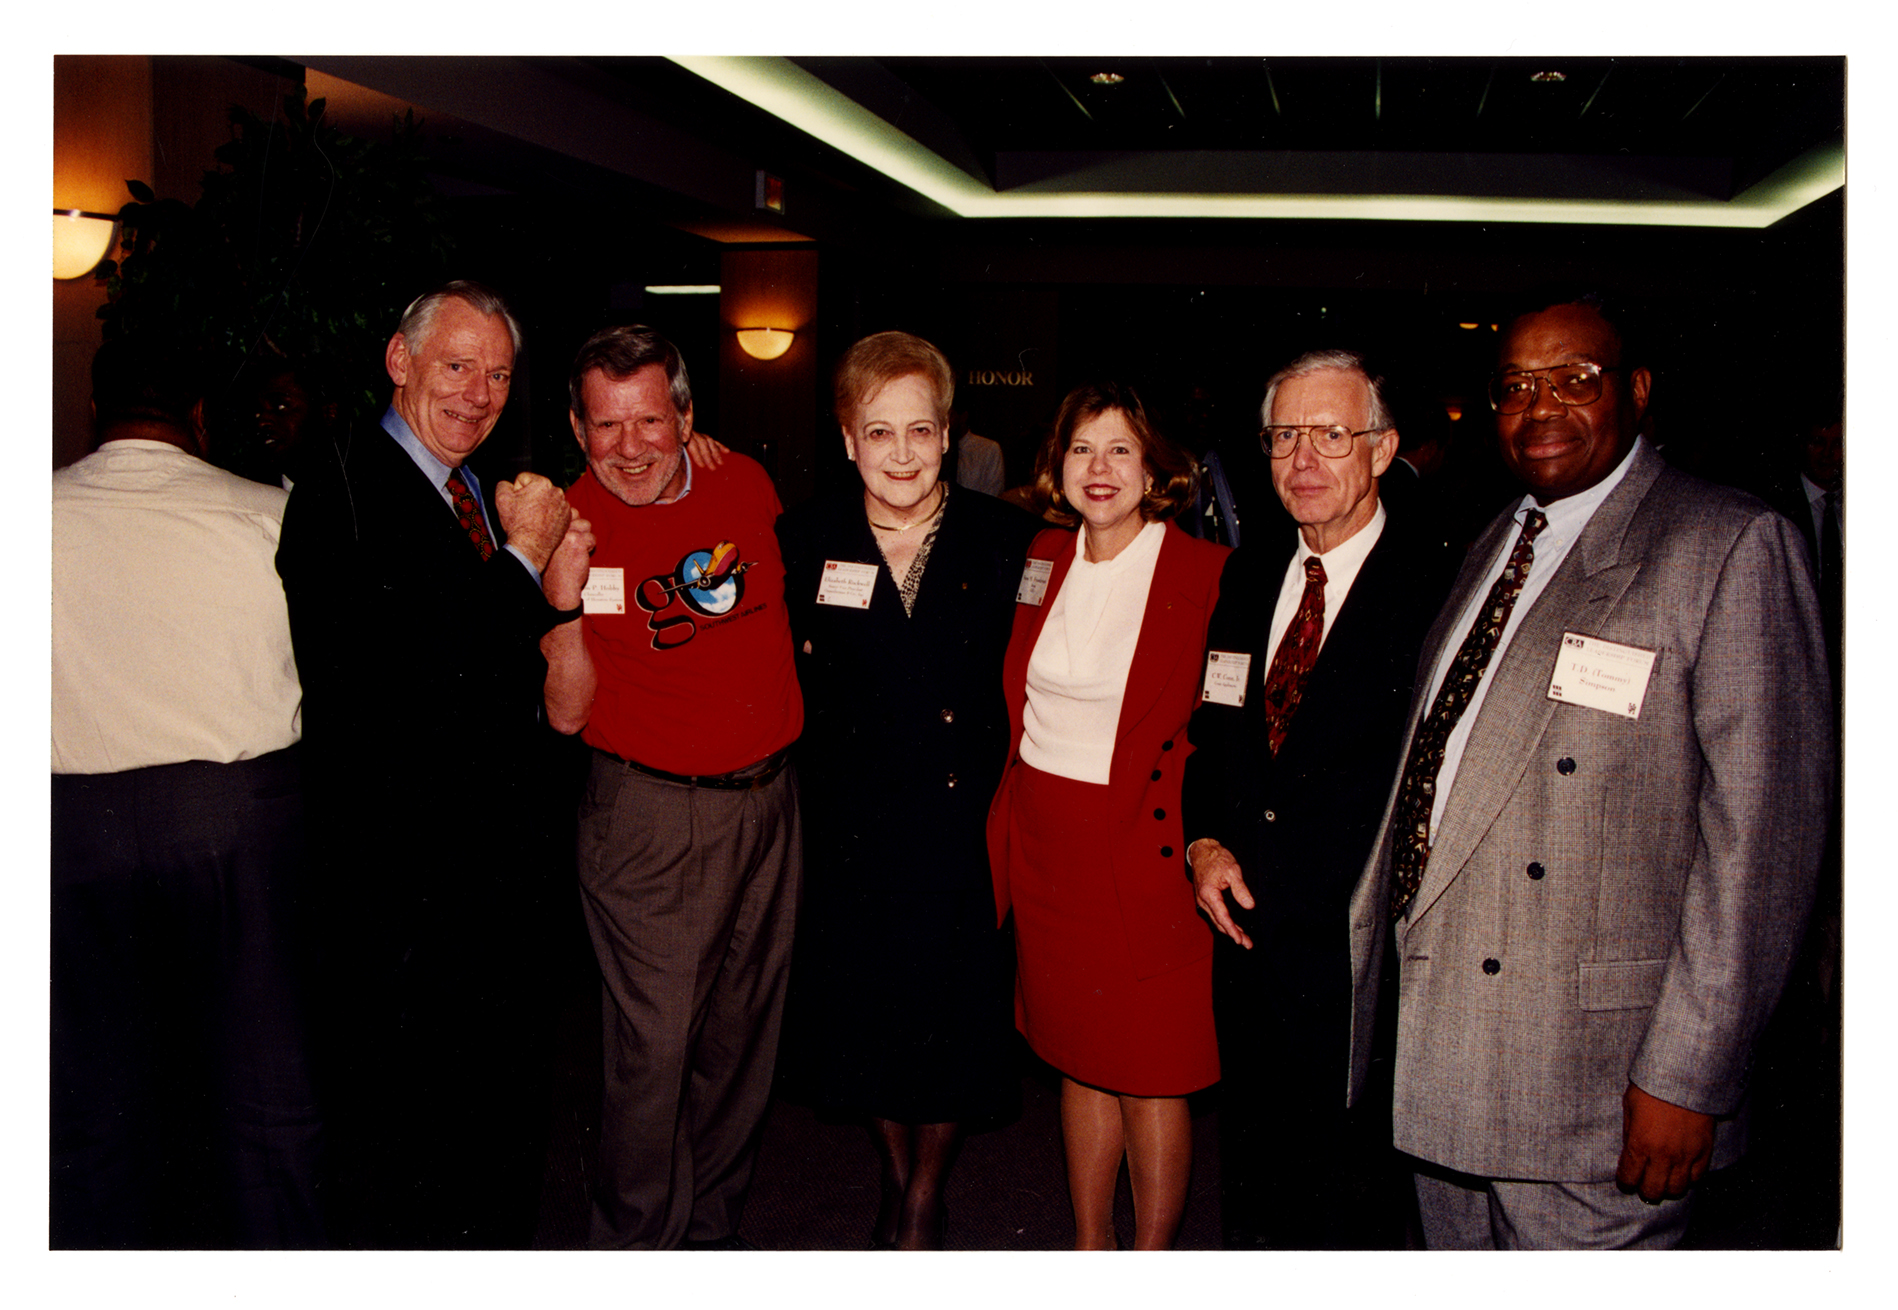 Elizabeth at a UH event with Bill Hobby.